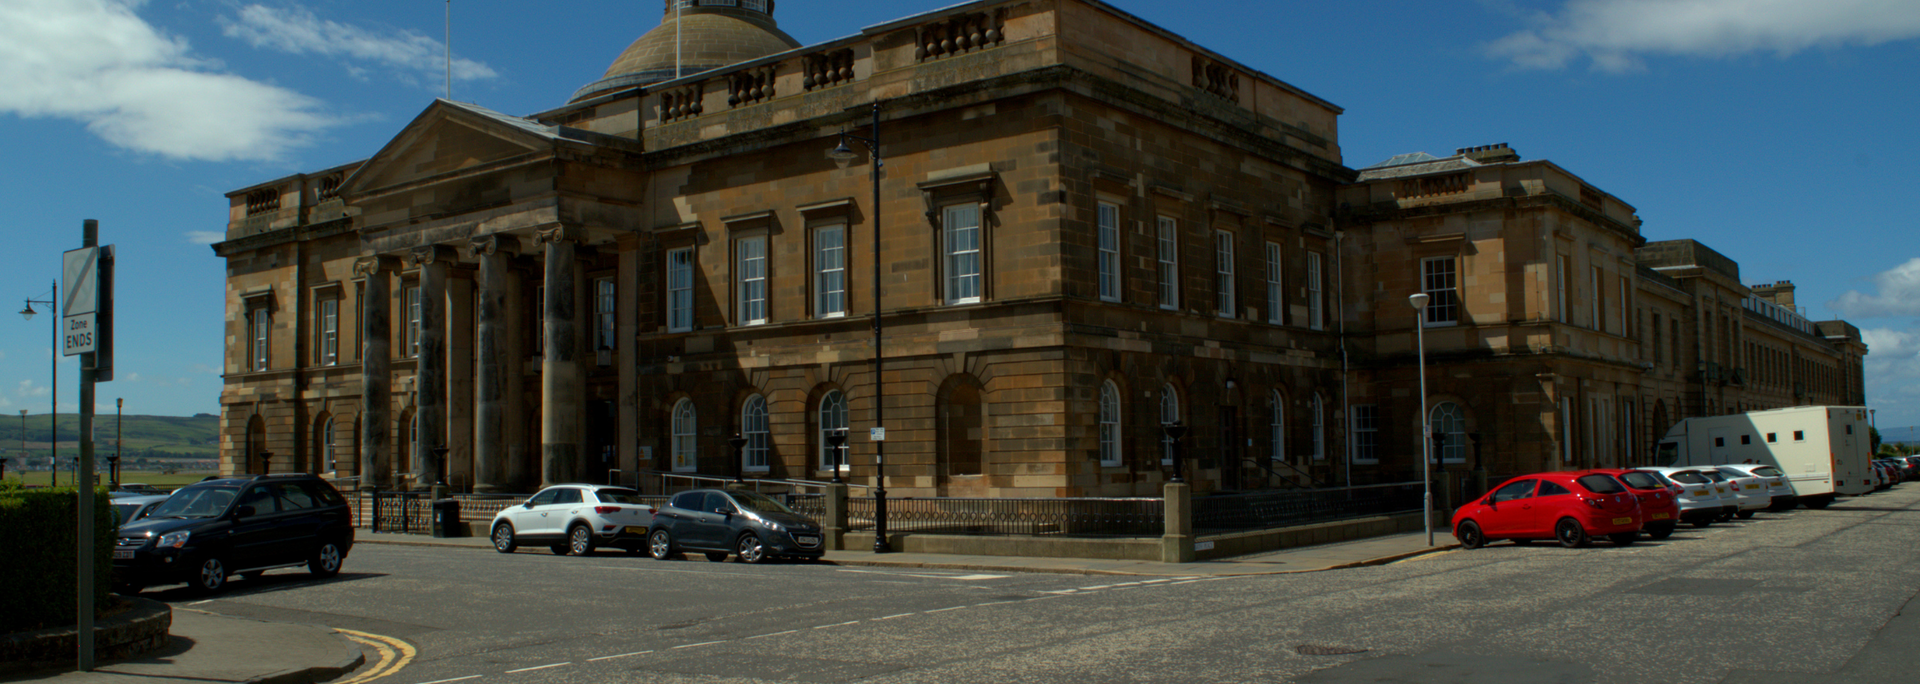 Picture of a (UK) County Court building